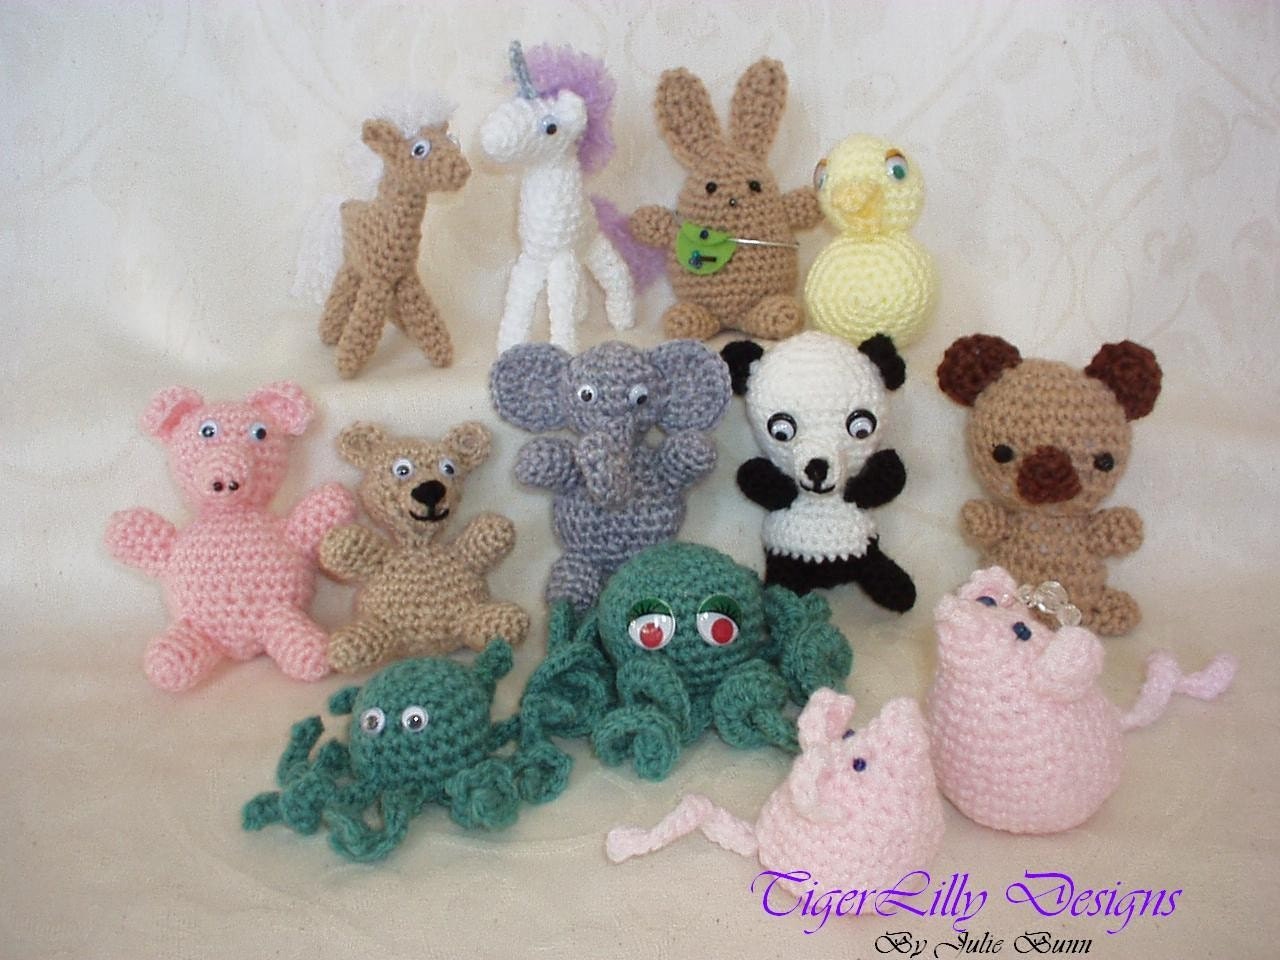 Links to Free Crochet Patterns for Stuffed Animals